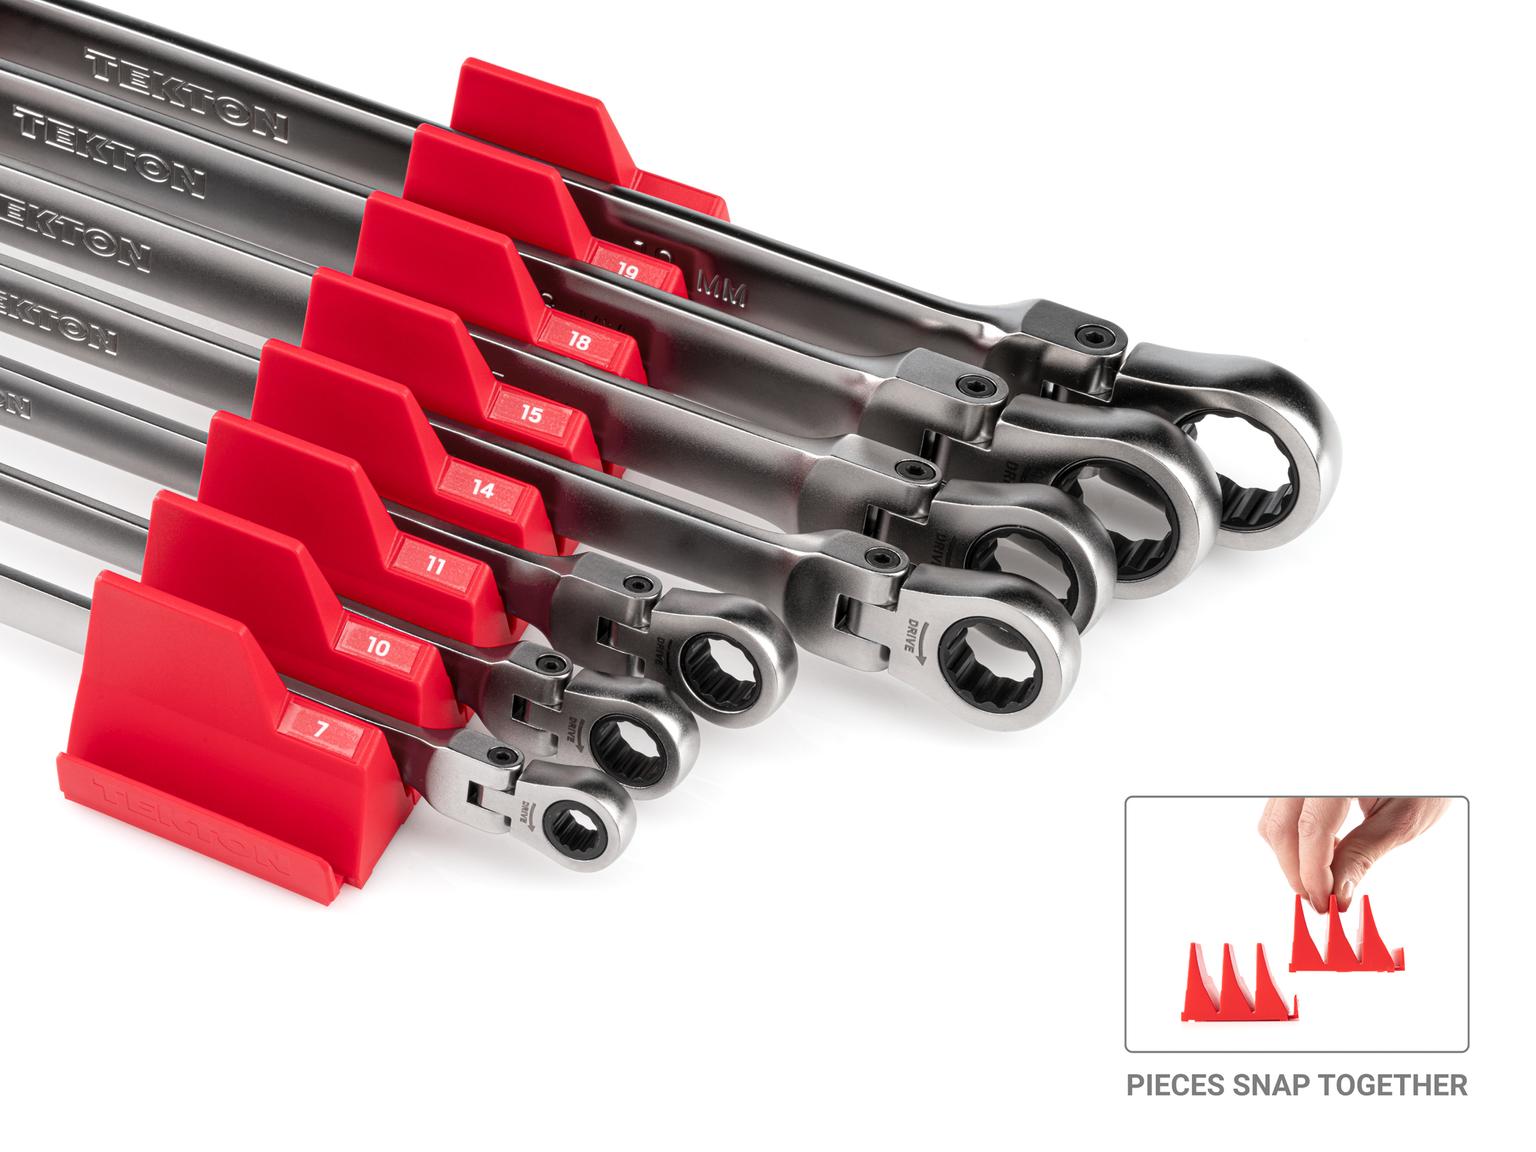 TEKTON WRB96301-T Long Flex Head 12-Point Ratcheting Box End Wrench Set with Modular Slotted Organizer, 7-Piece (6-19 mm)